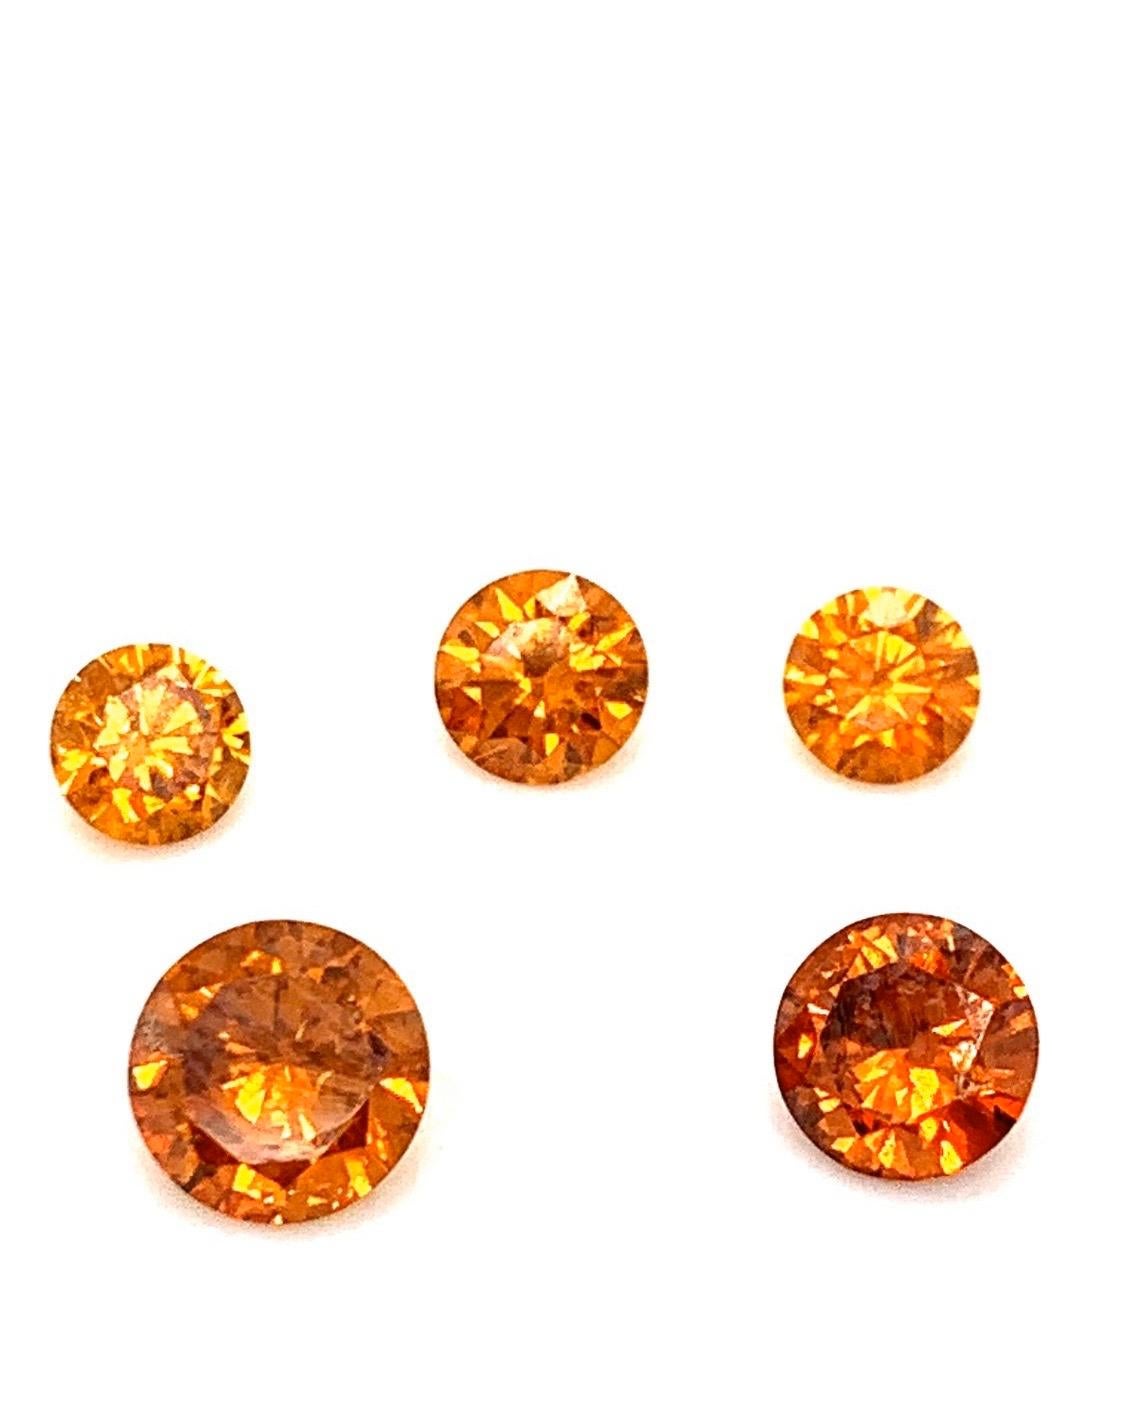 Suite of lose round brilliant orange diamonds weighing 3.20 carat total weight.
unique collectible/investment opportunity.
Suite of extremely rare natural orange diamonds, all certified by the GIA as natural and untreated also graded by the GIA as